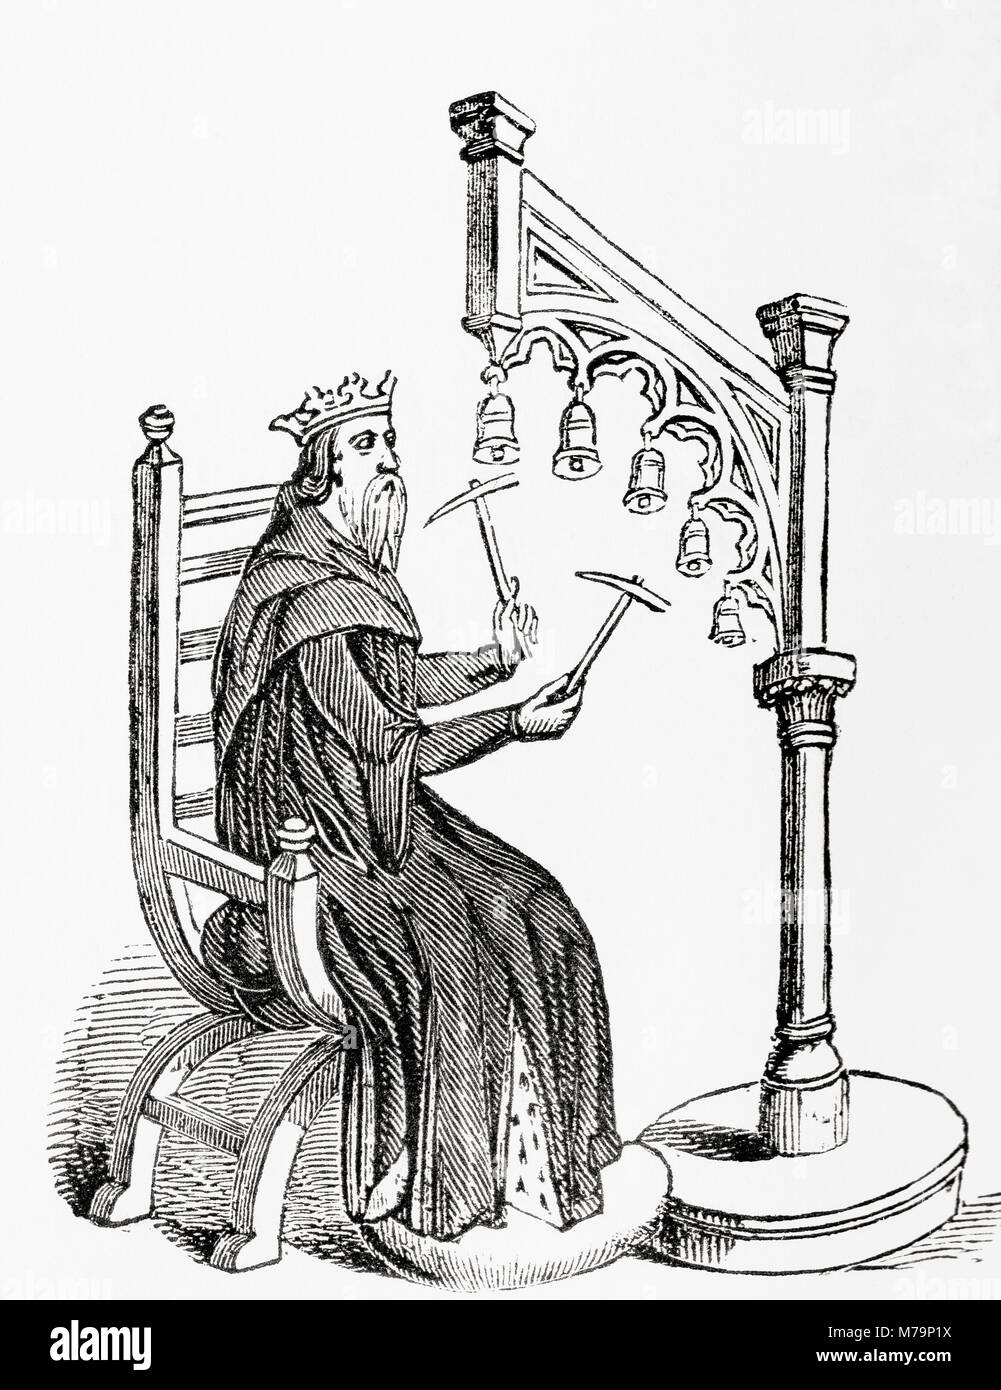 A king using small hammers to play hand-bells which were suspended from a wooden stand.  From Old England: A Pictorial Museum, published 1847. Stock Photo